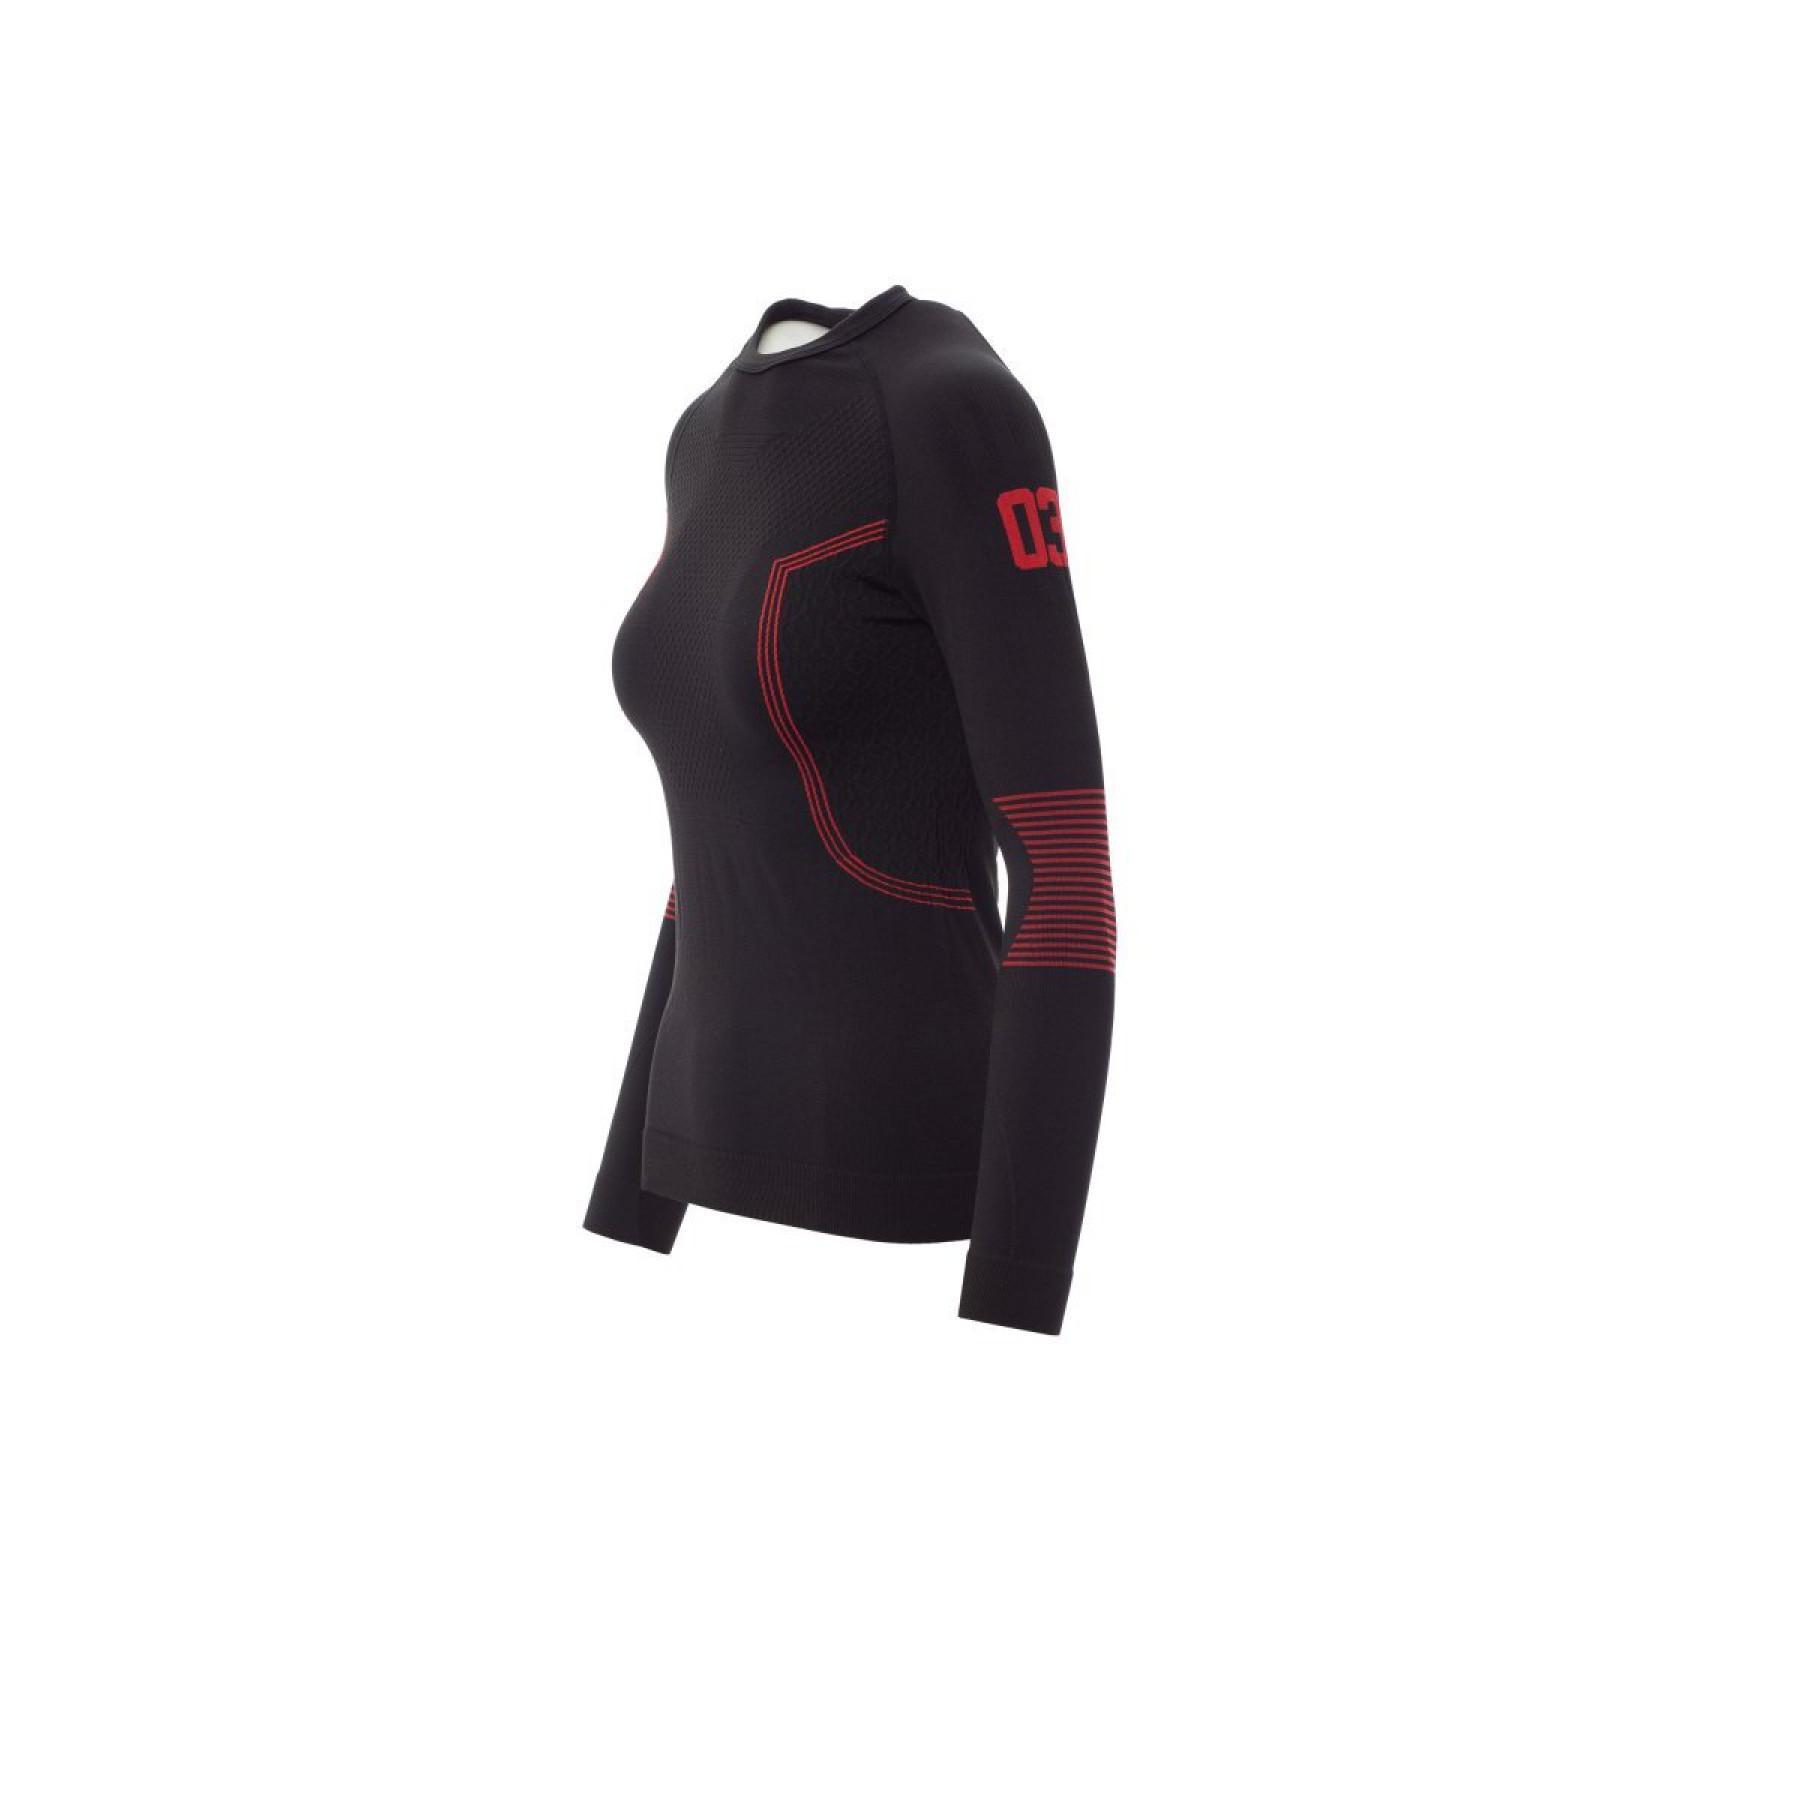 Camisola mulher Payper Thermo Pro 240 Ls